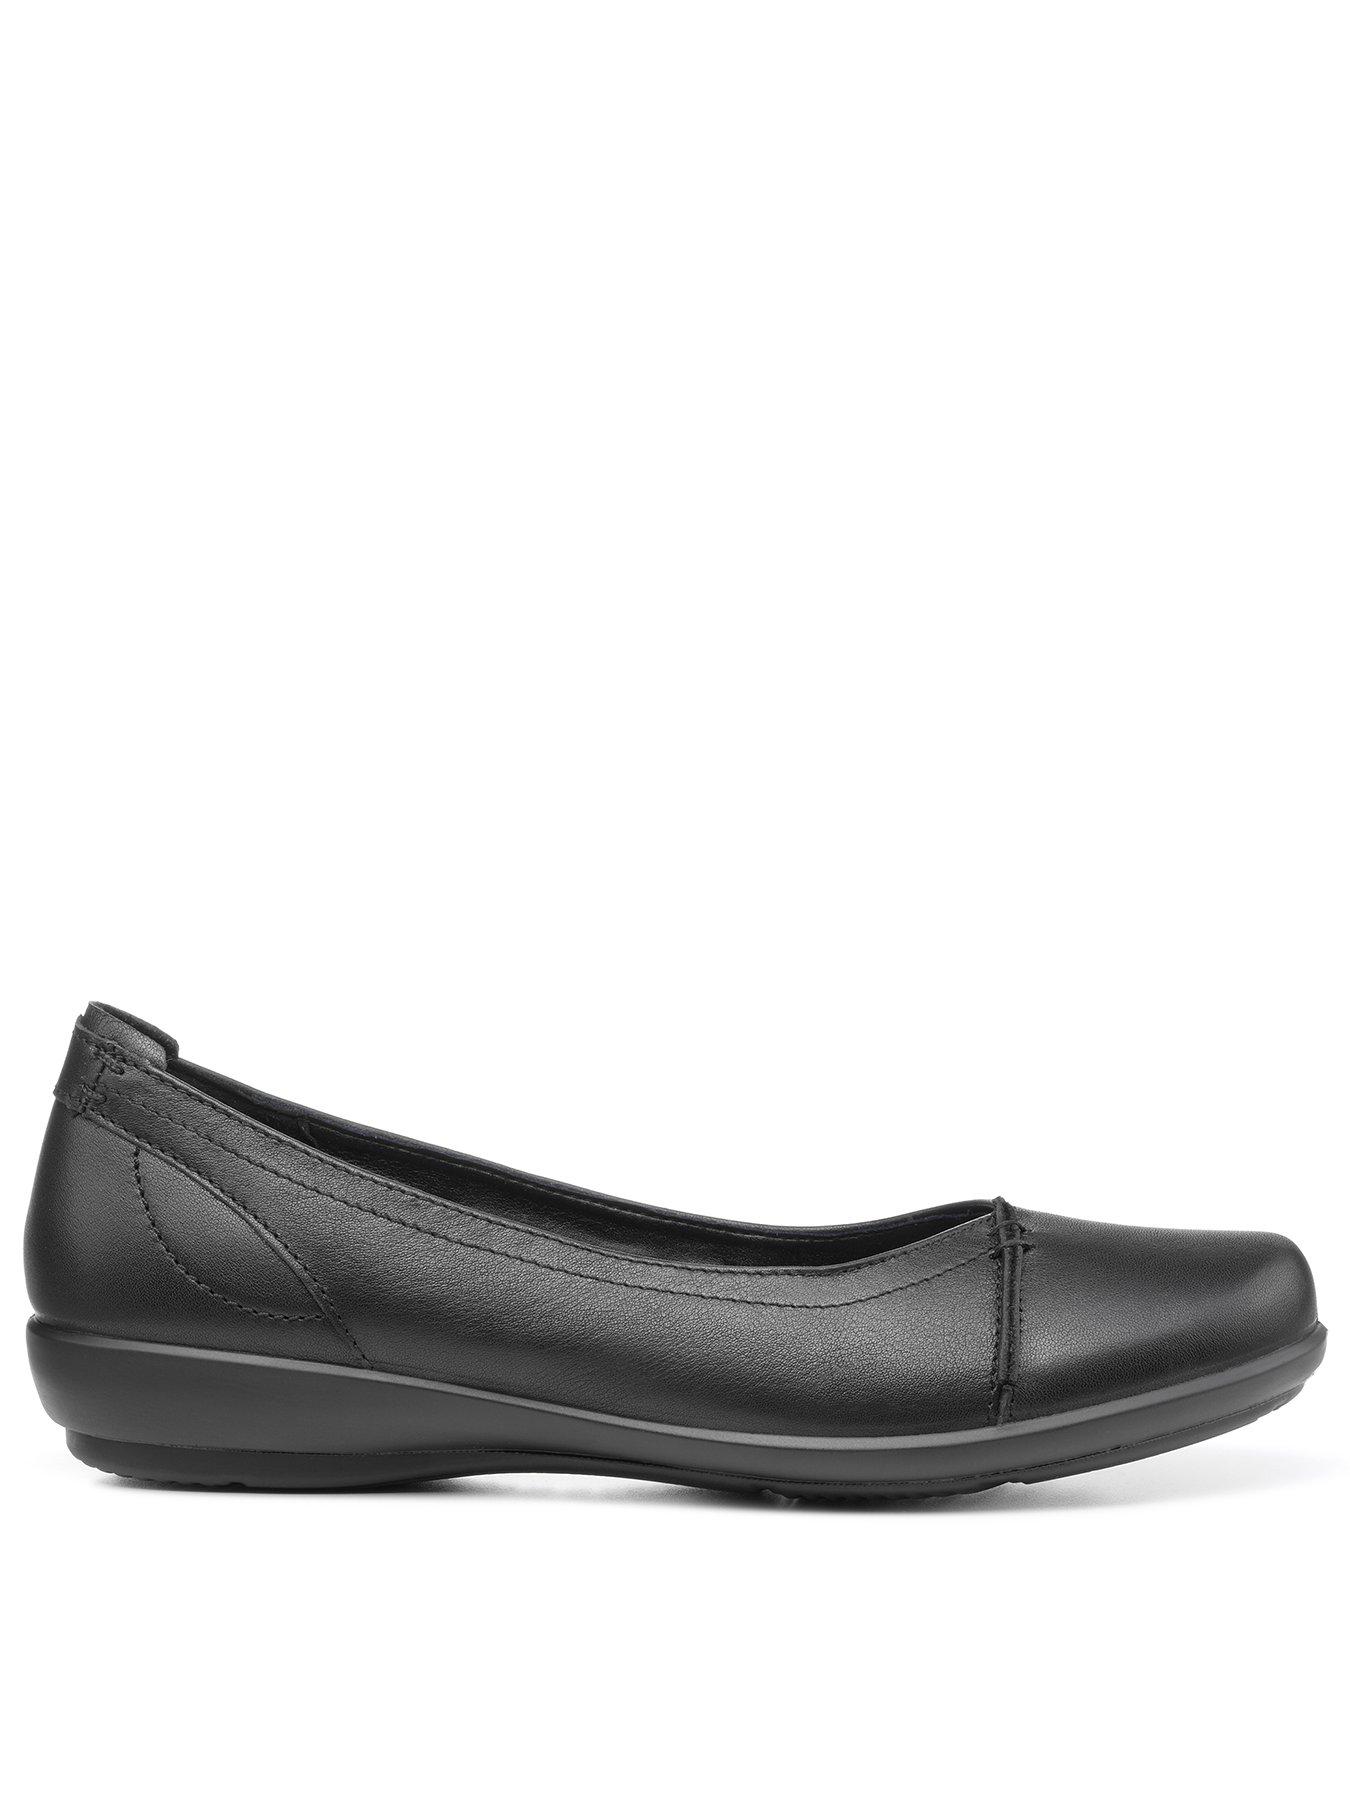 Hotter Robyn Ii Leather Ballerina Shoes | very.co.uk